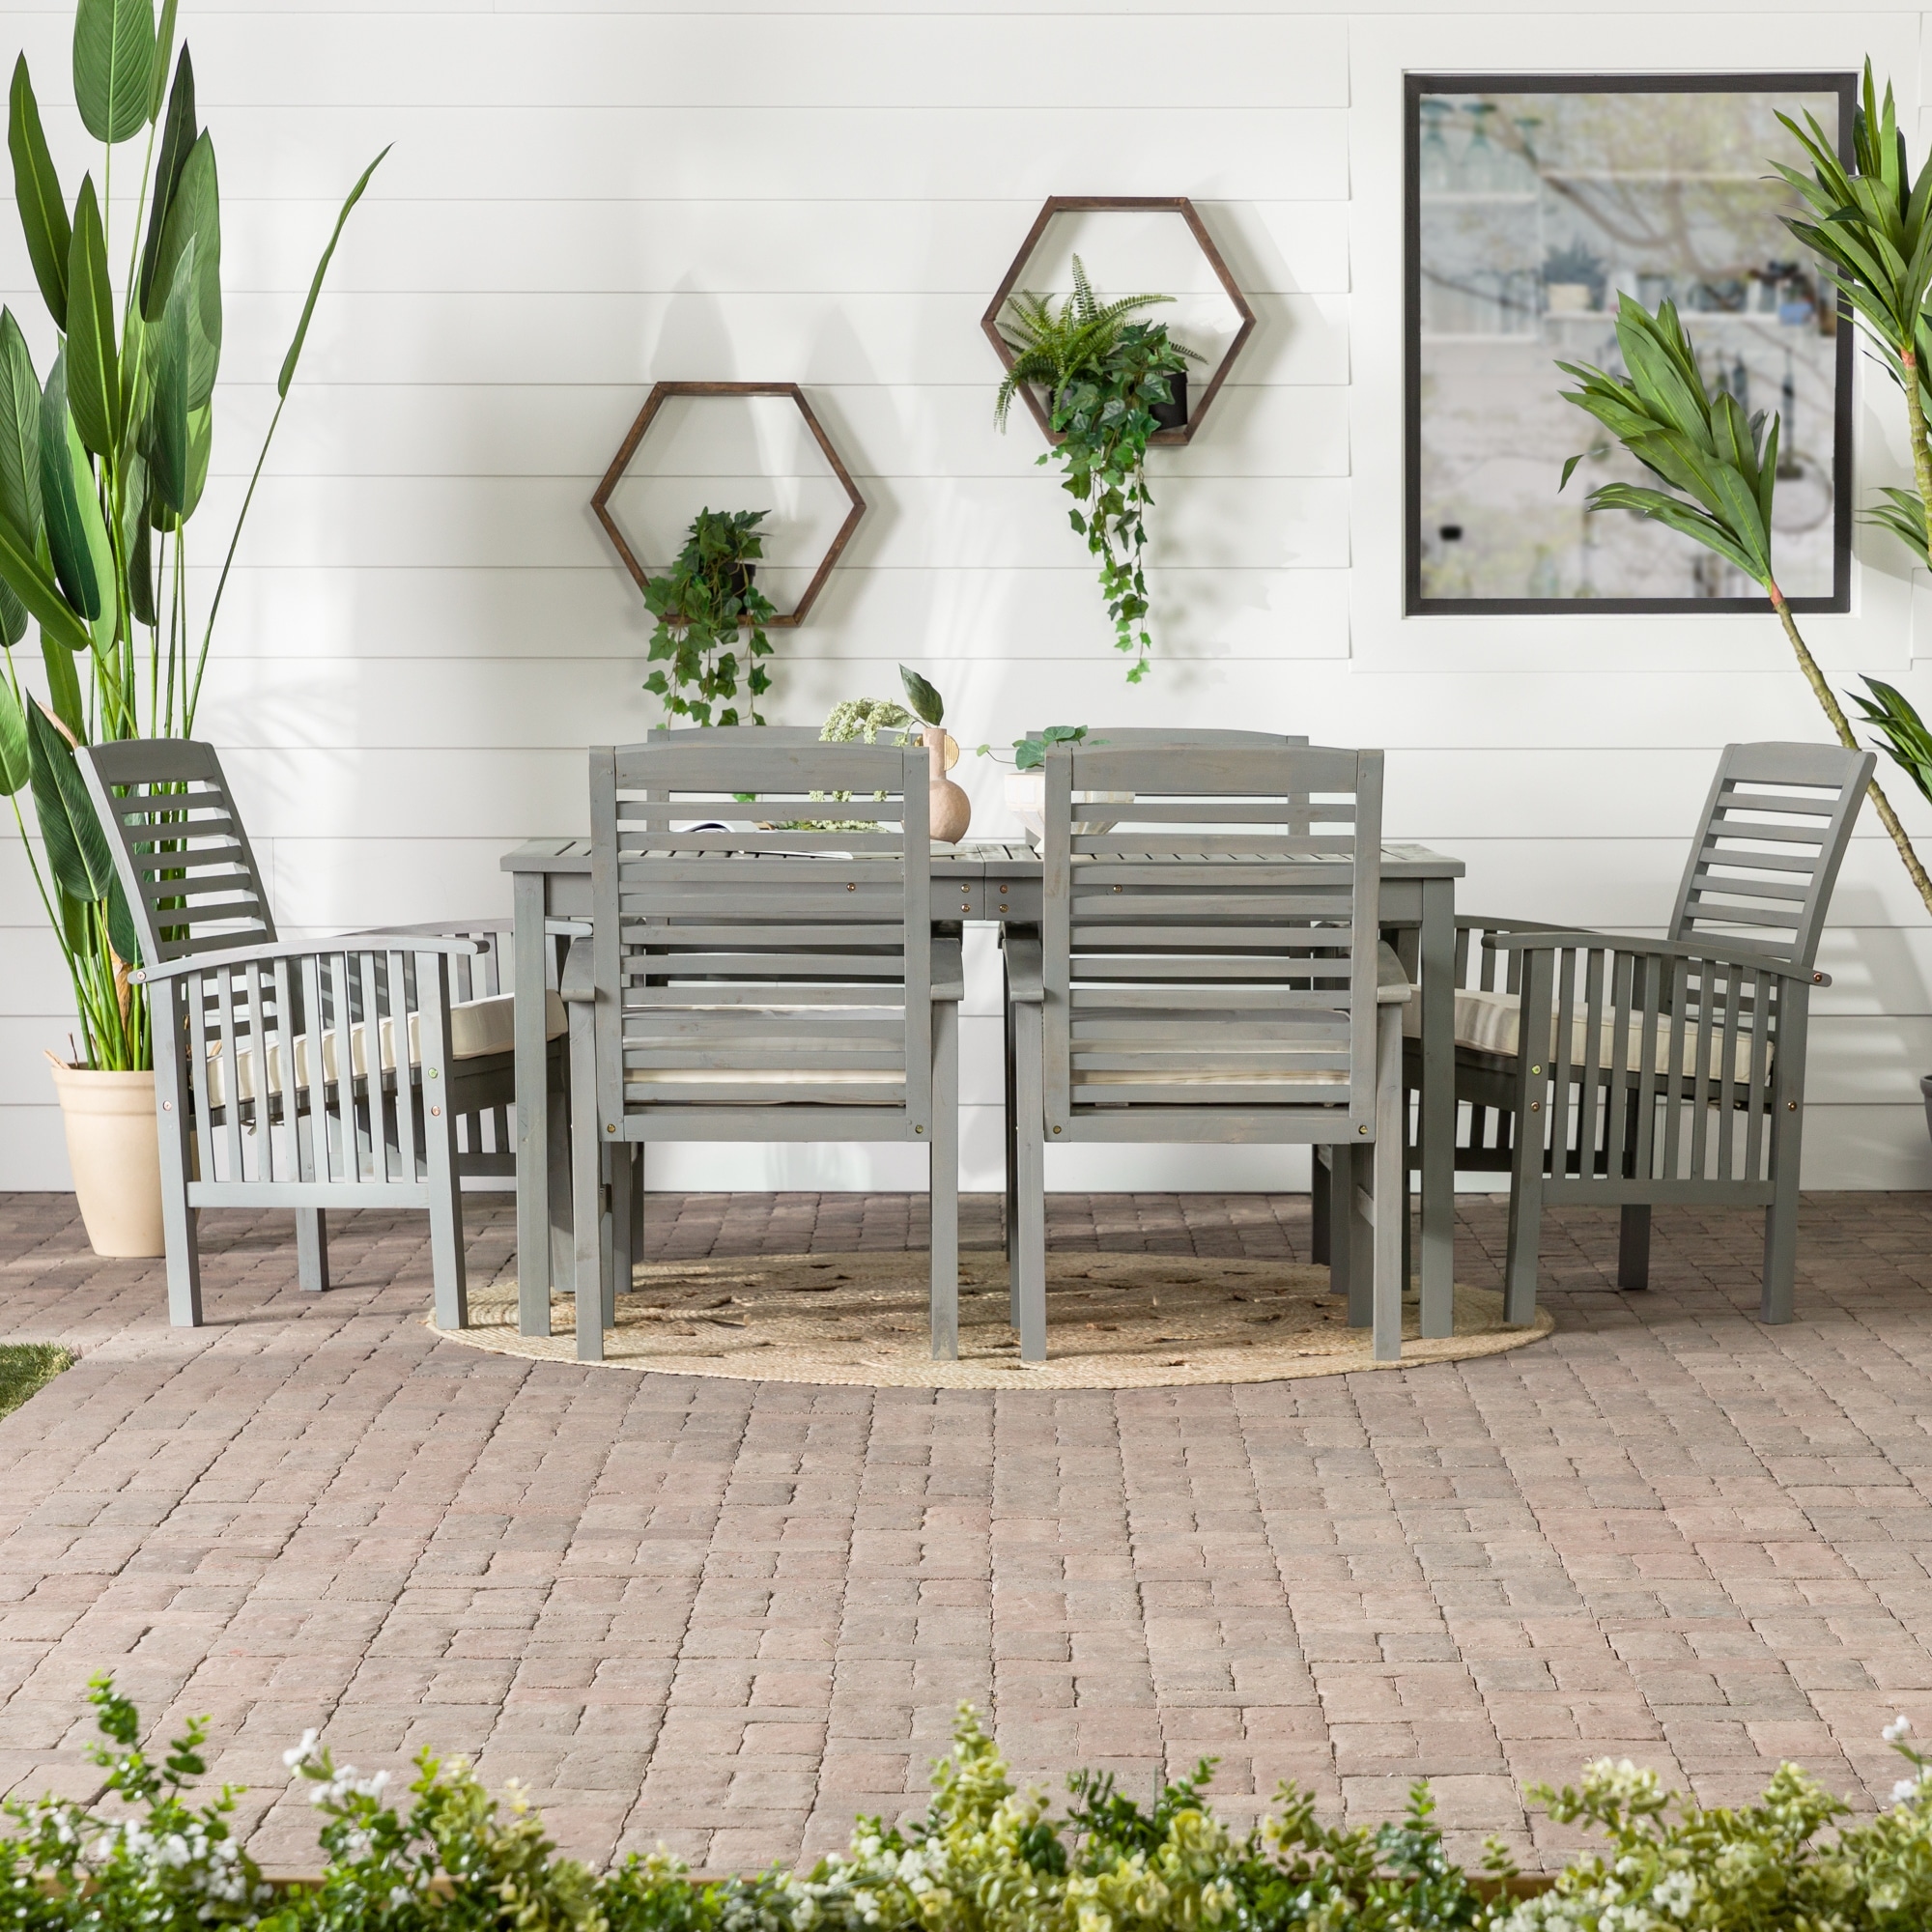 Middlebrook Surfside 7-piece Acacia Wood Outdoor Dining Set